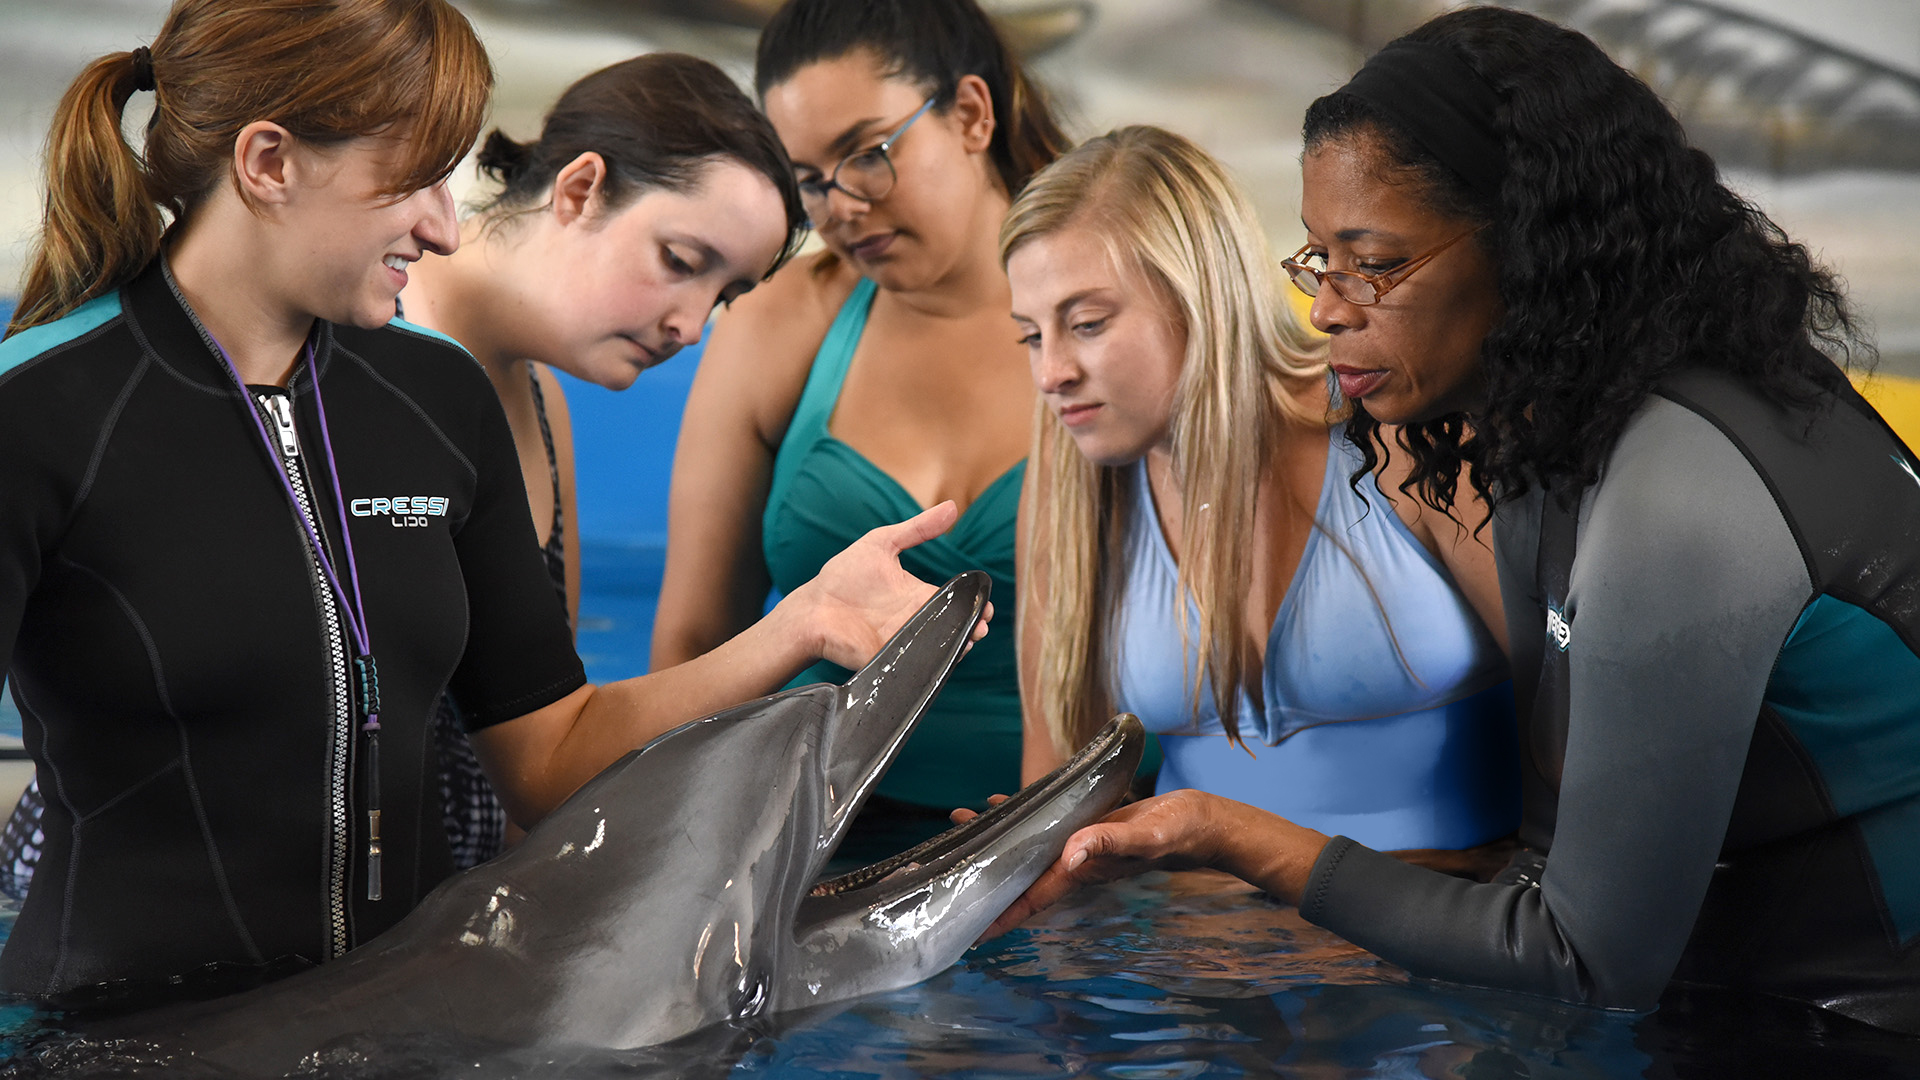 A trainer and veterinarian examine a dolphin while three students observe